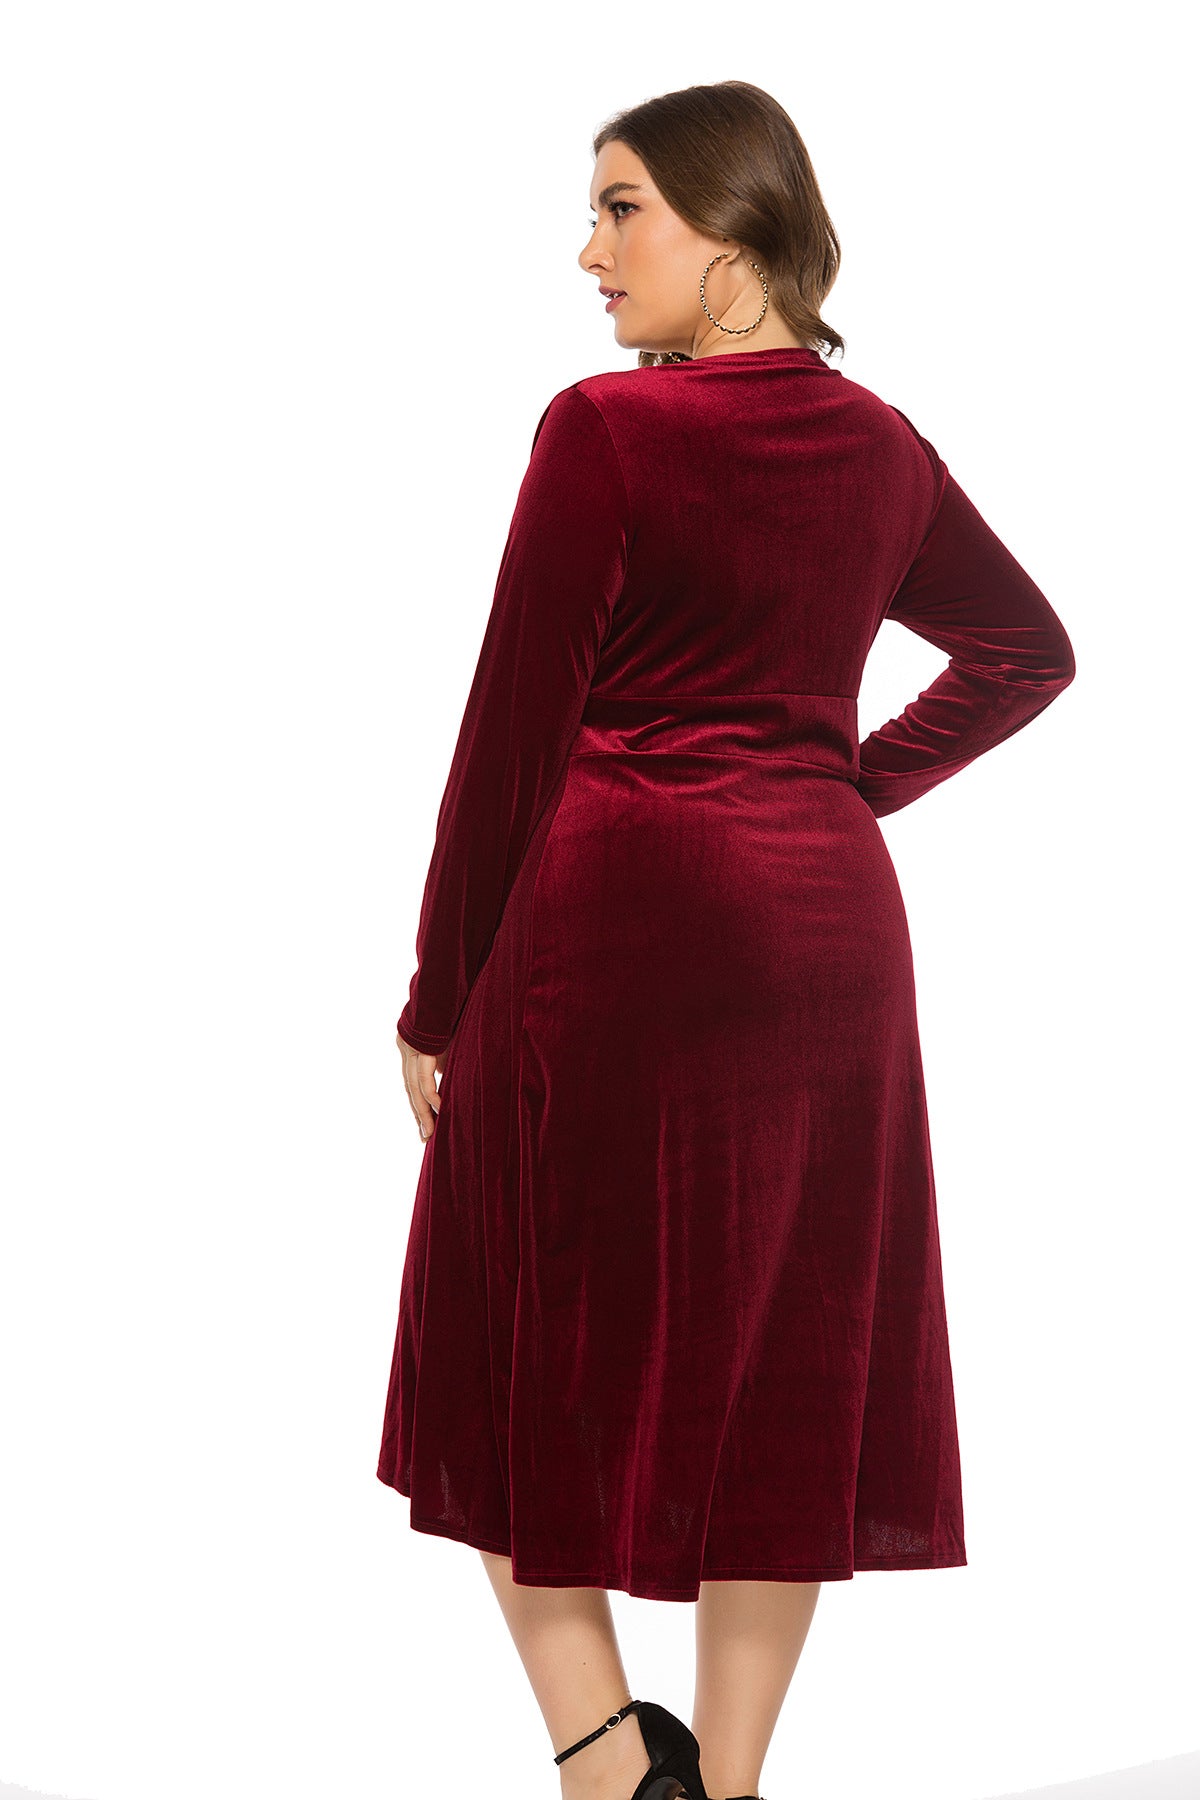 Long Sleeves Women Plus Sizes Fall Dresses-Dresses-Free Shipping at meselling99